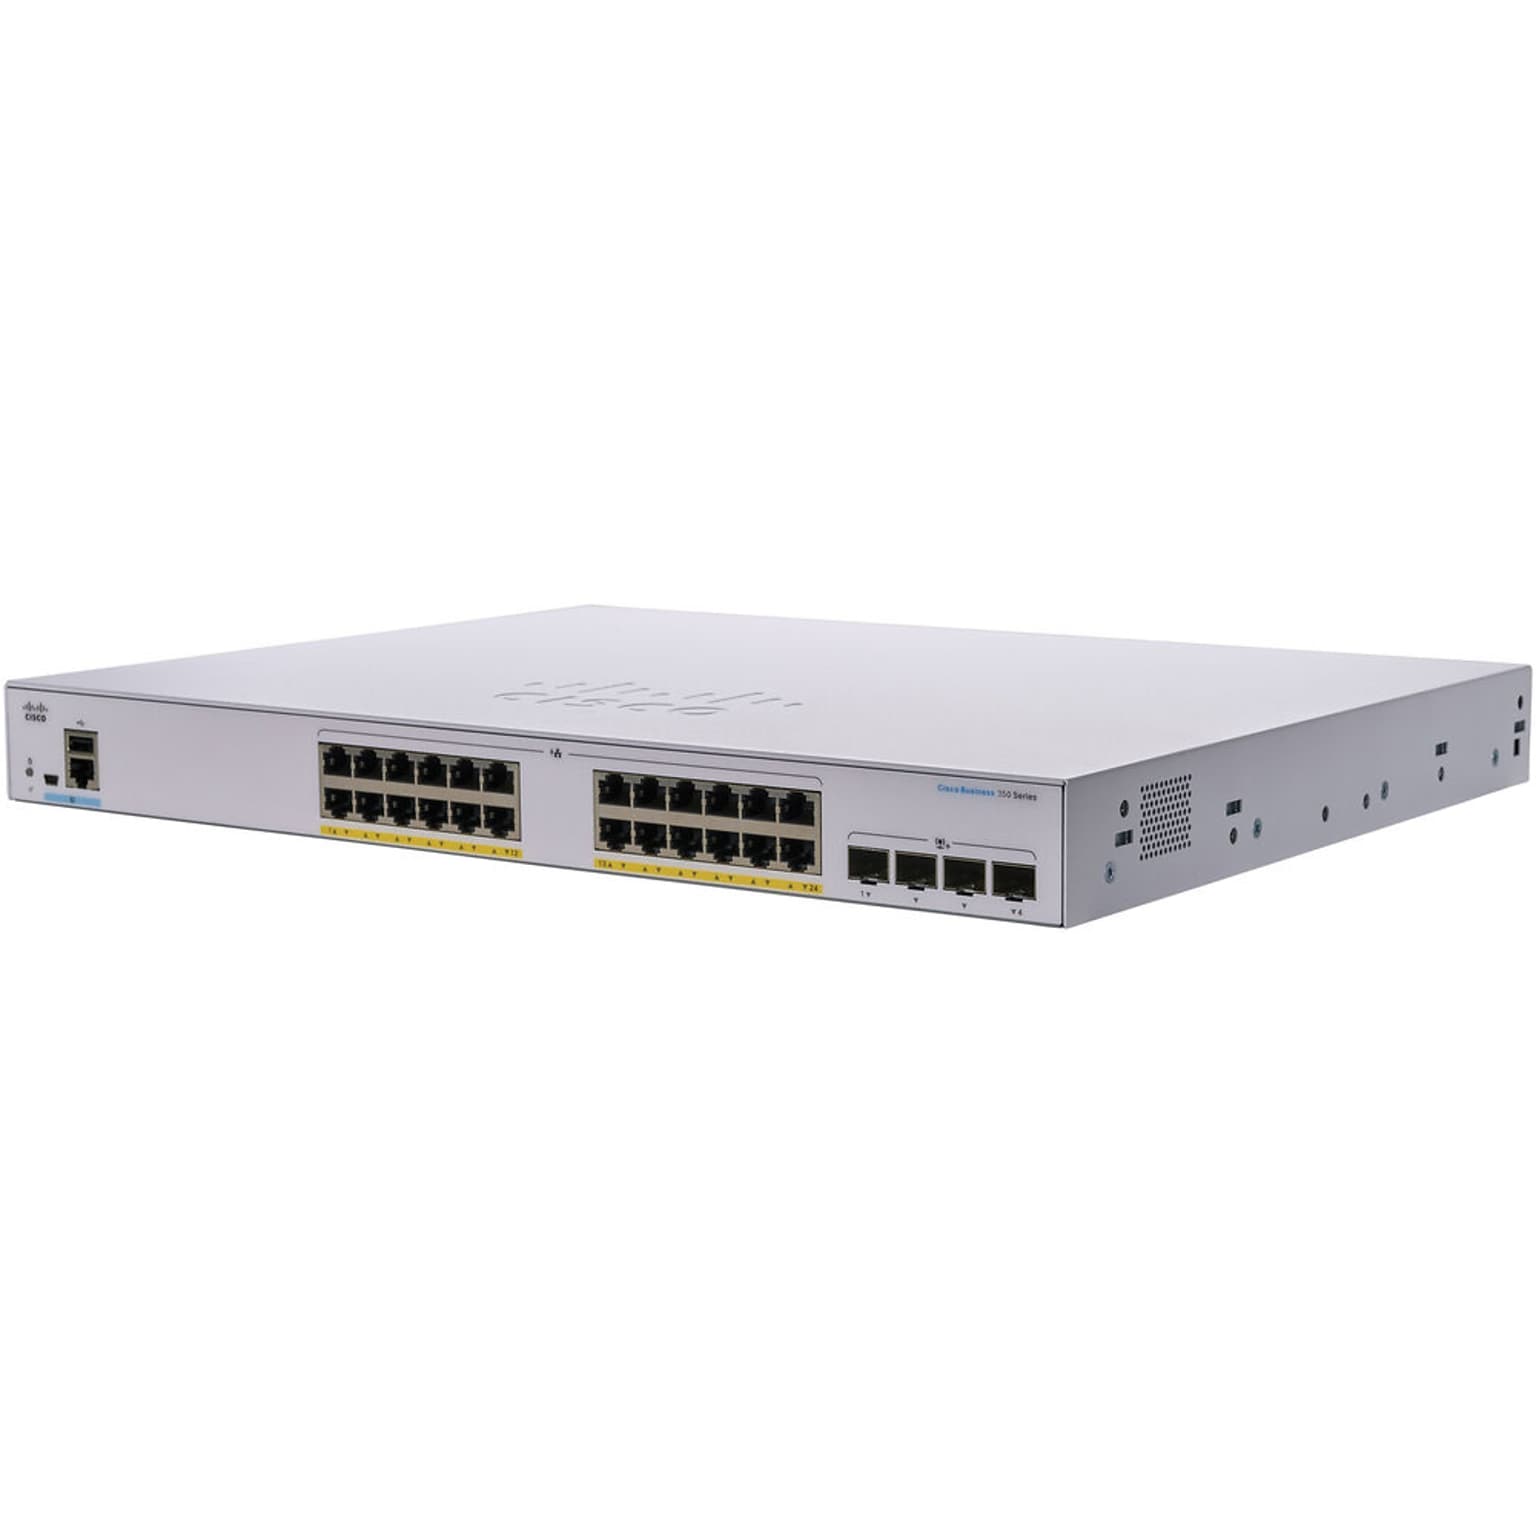 Cisco Business 350 Series 28-Port Gigabit Ethernet Managed Switch, Silver  (CBS350-24FP-4X-NA)